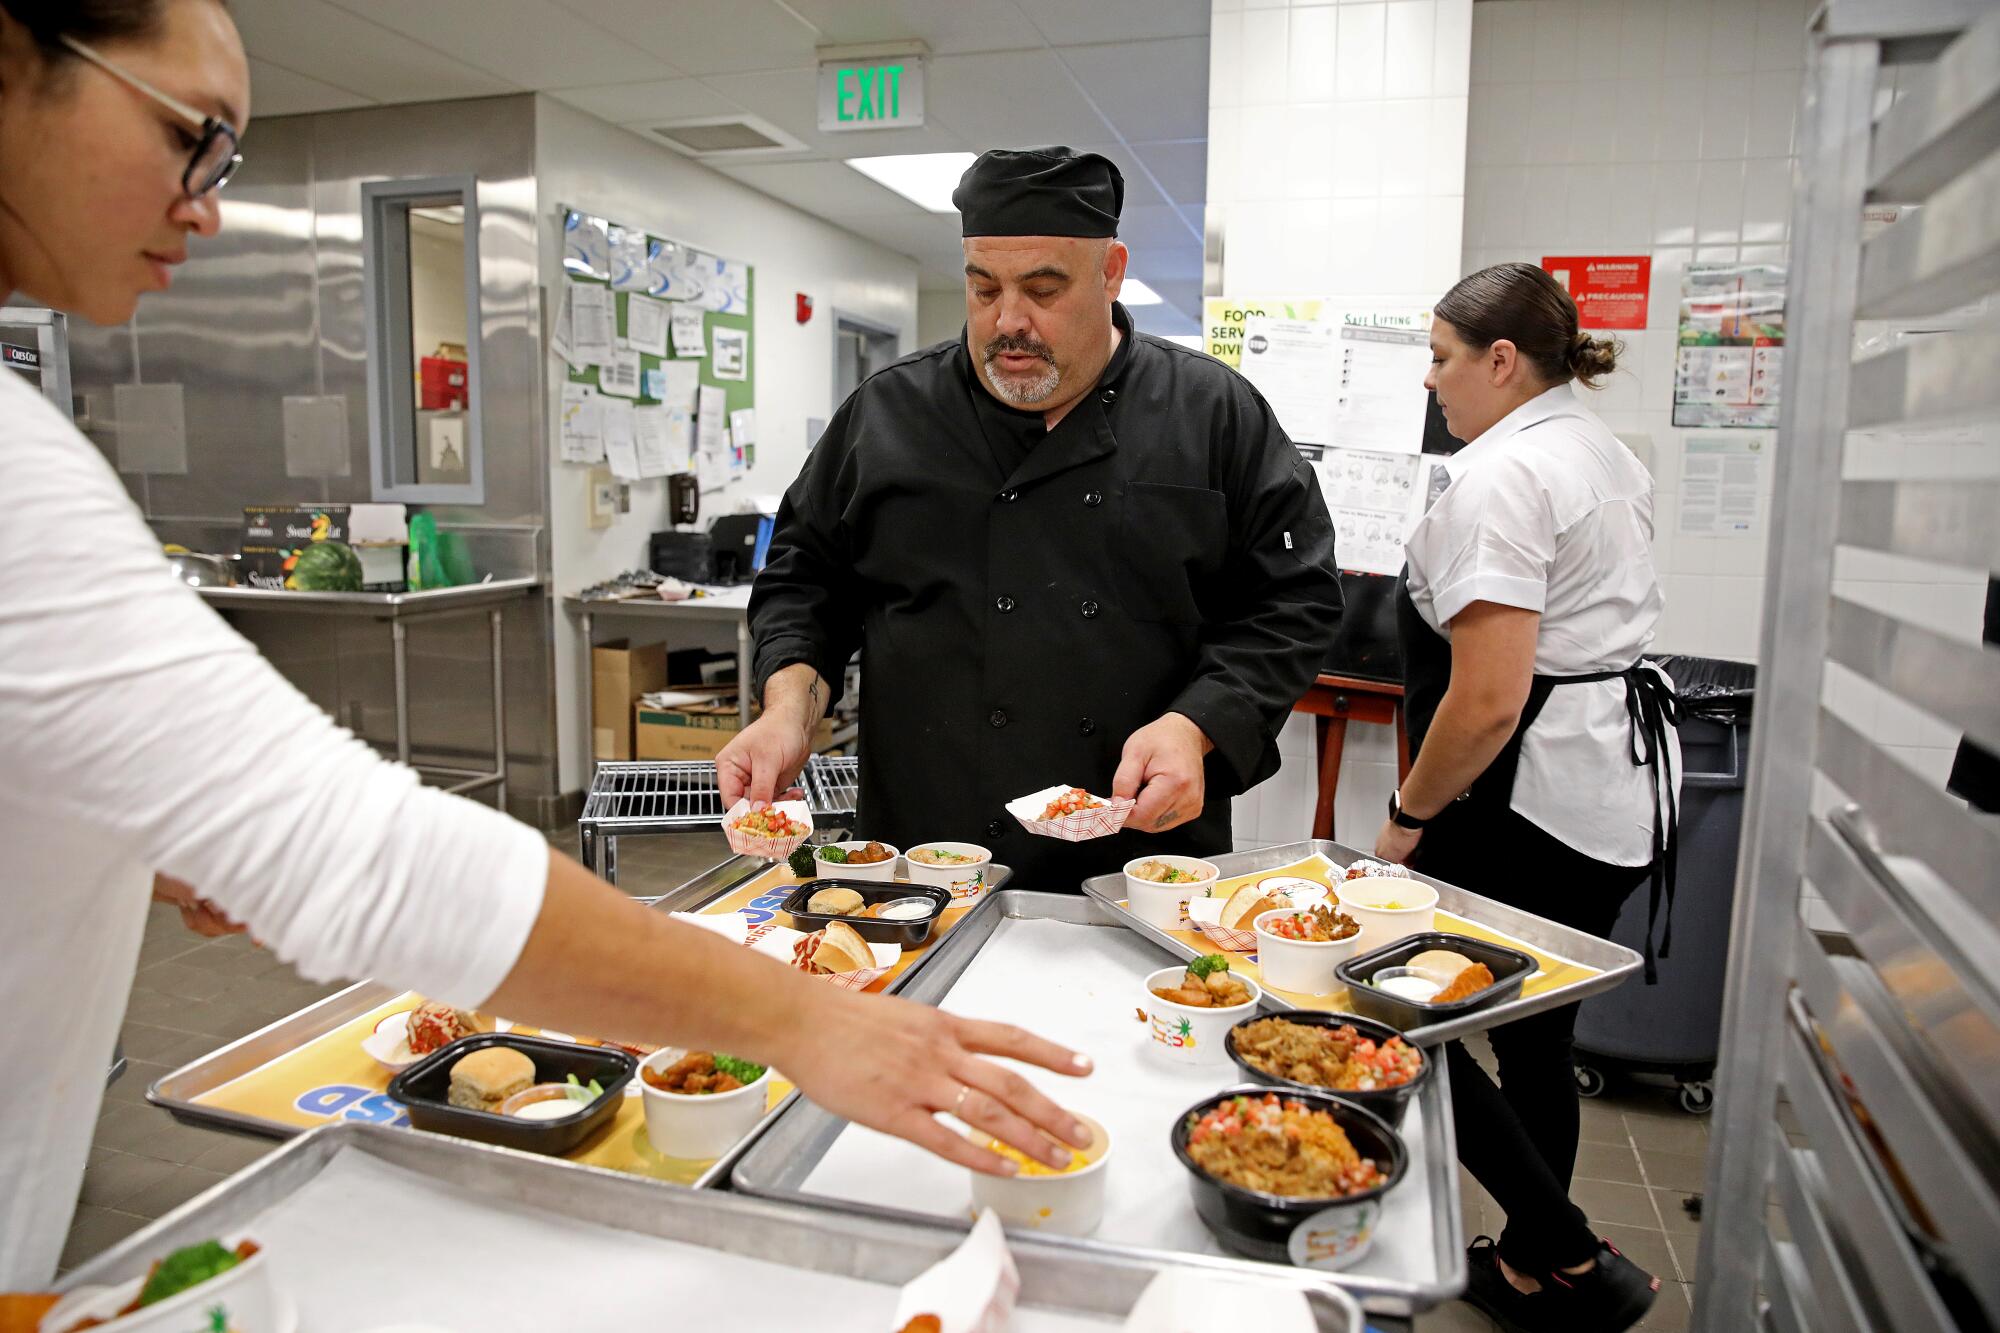 Mario Fiore arranges cafeteria samples on a tray.